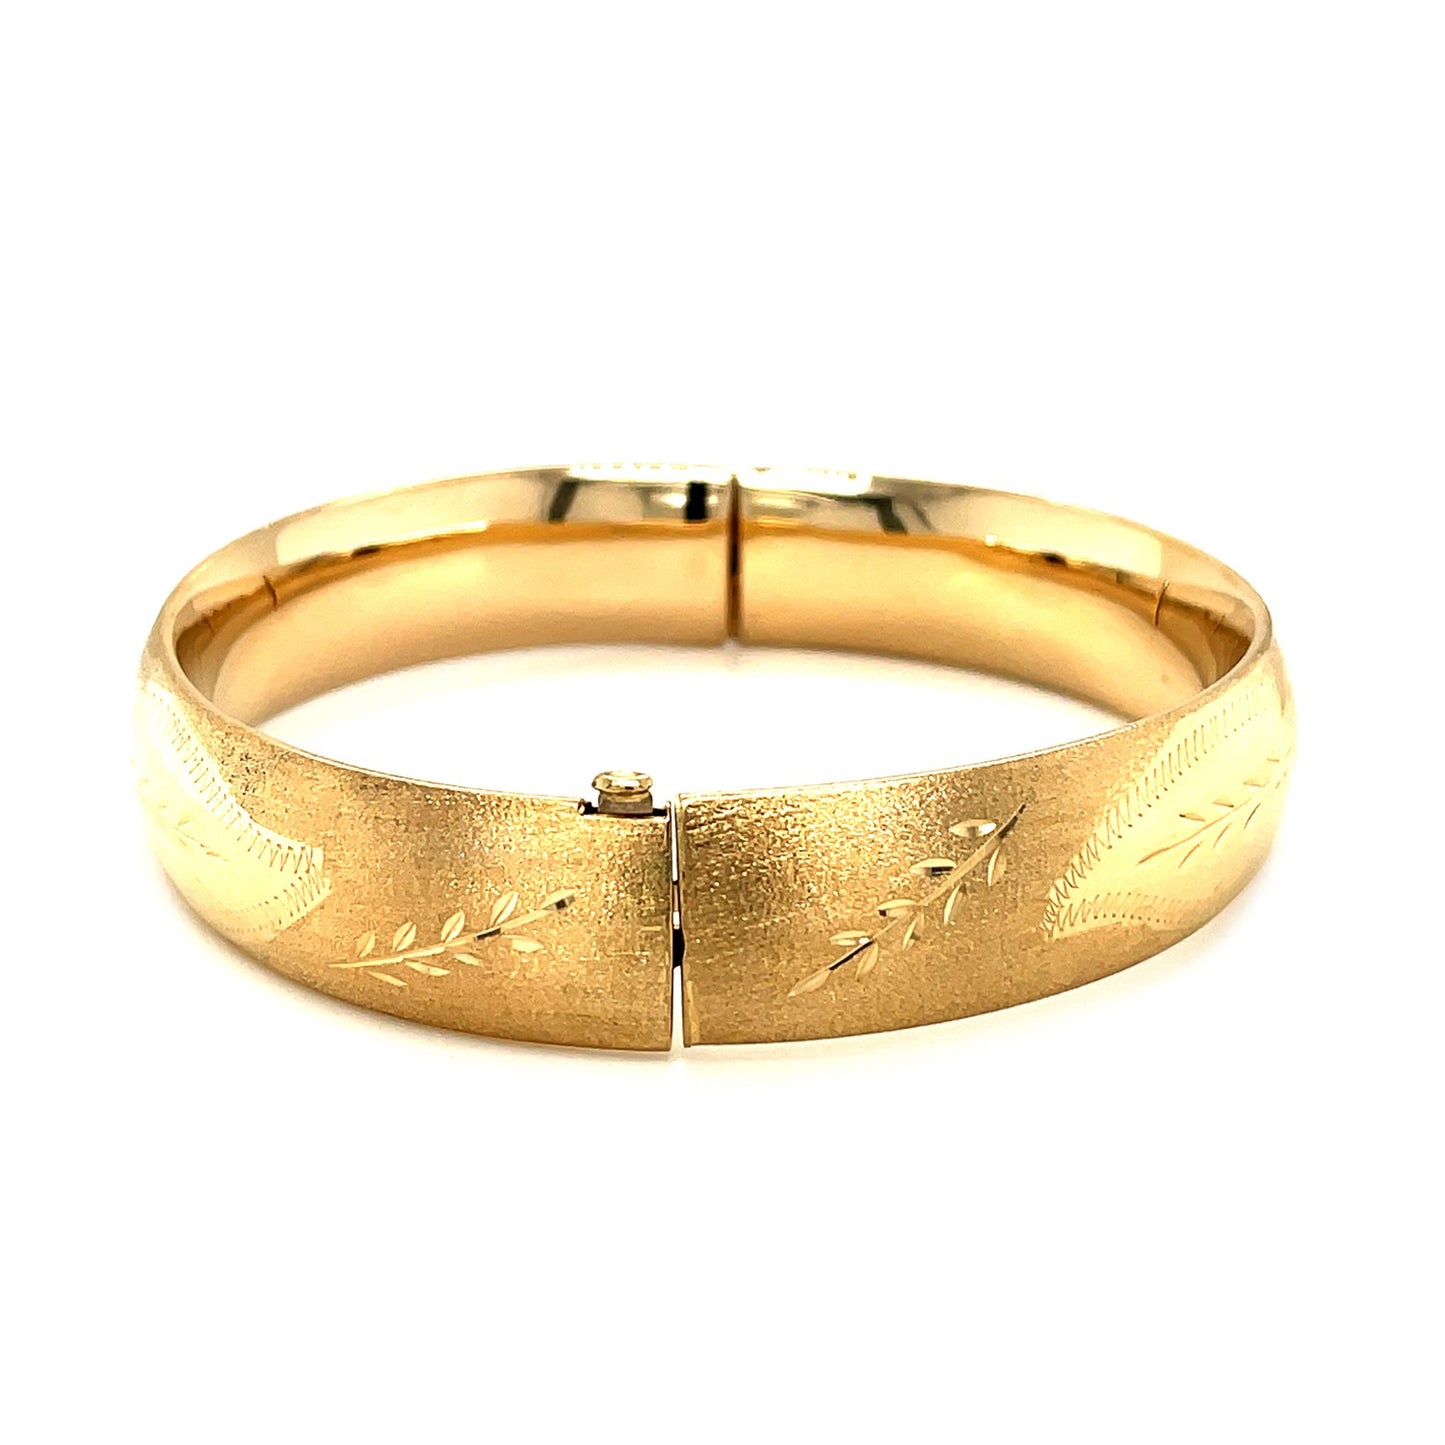 Classic Floral Carved Bangle in 14k Yellow Gold (13.5mm)